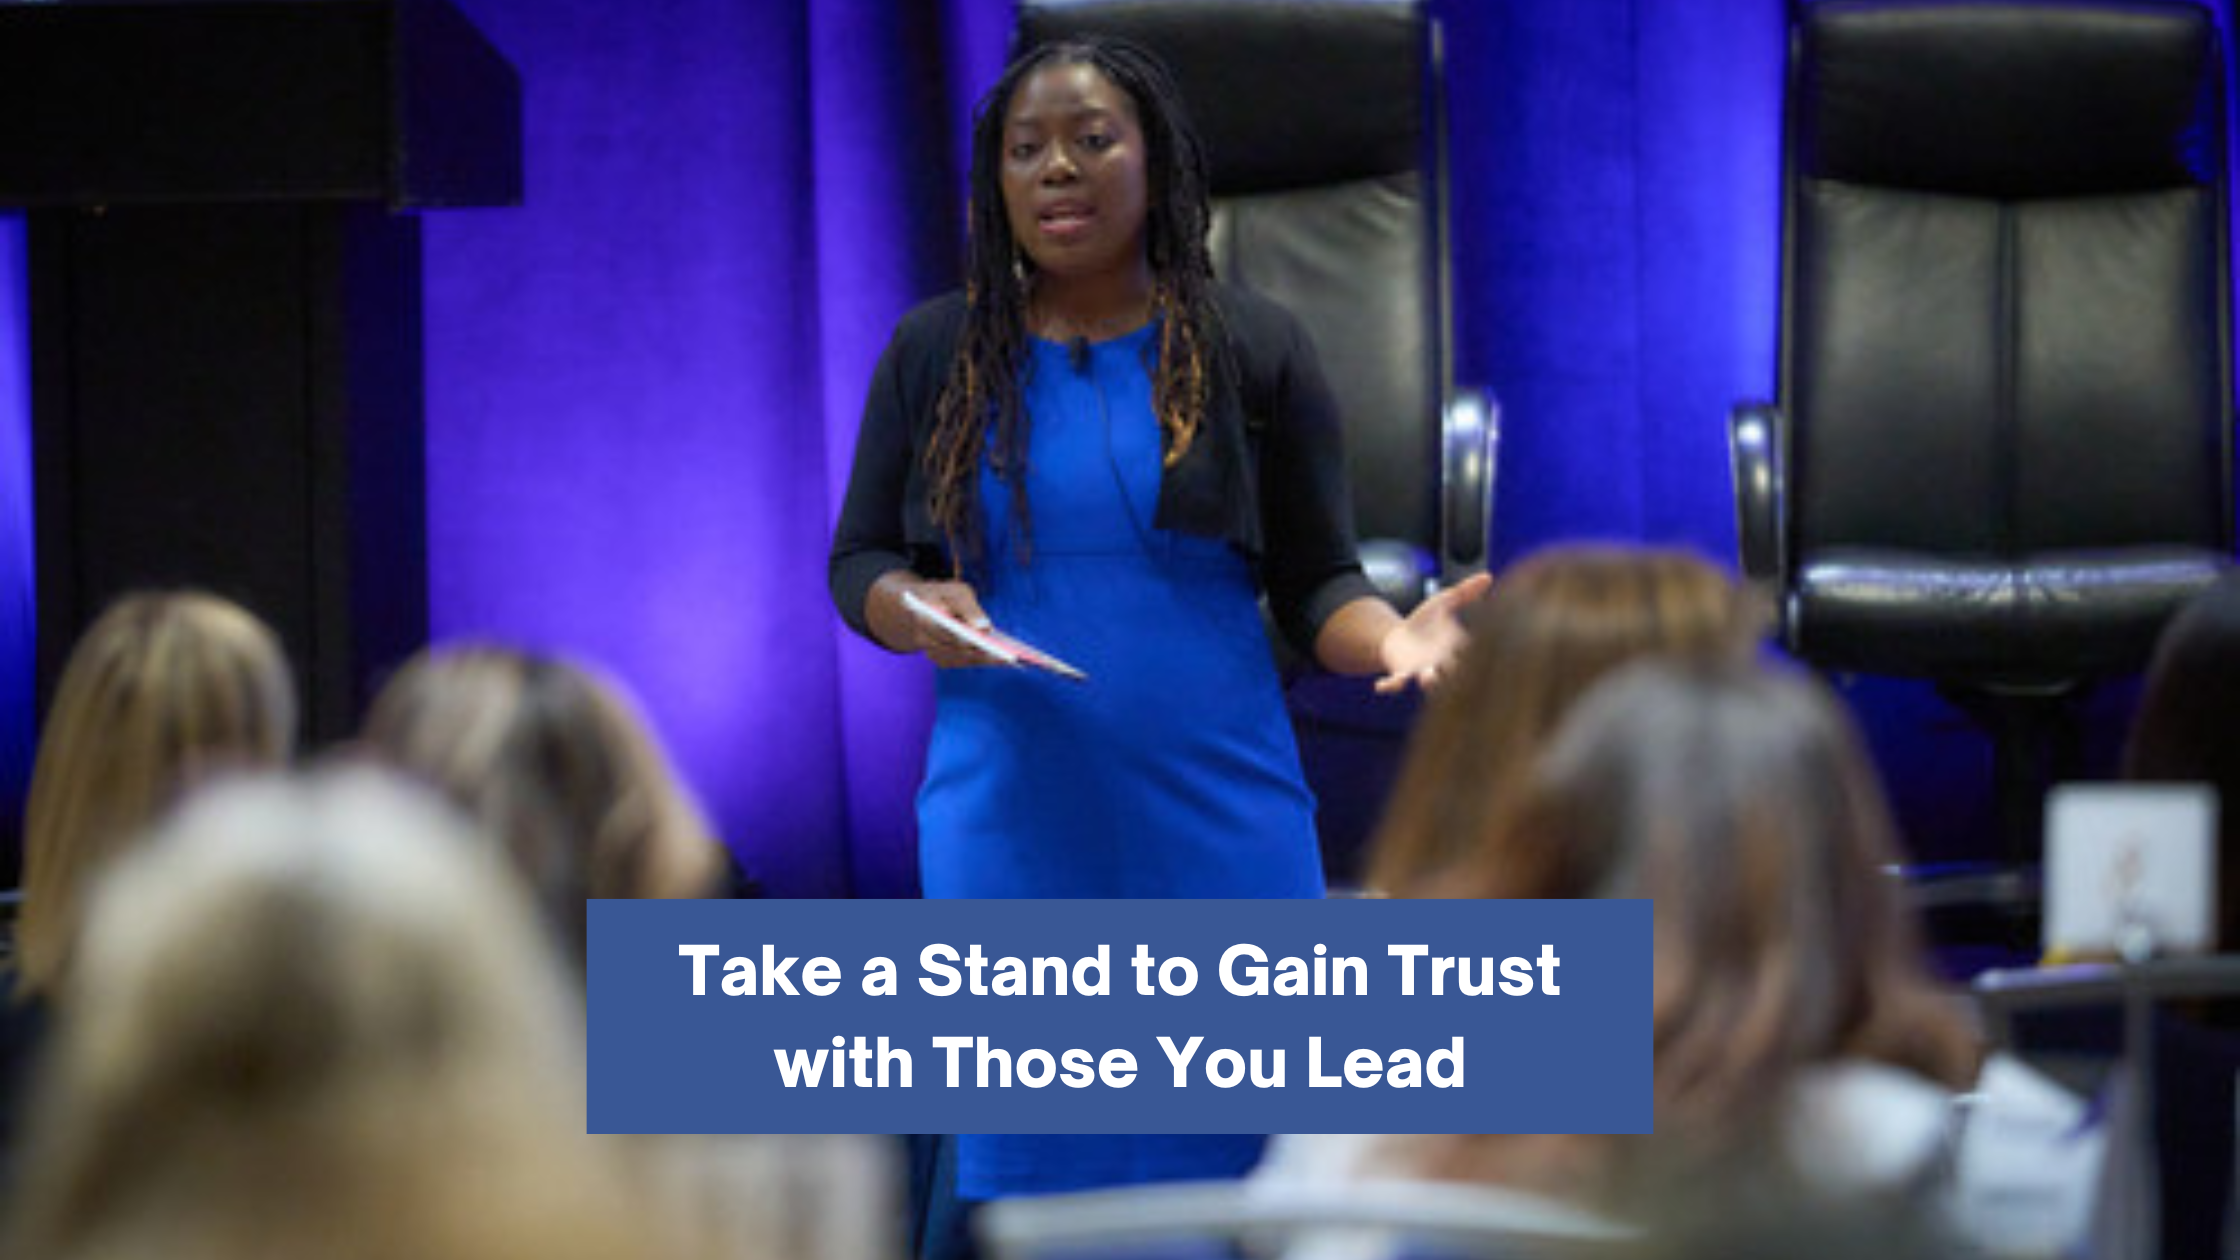 Take a Stand to Gain Trust with Those You Lead